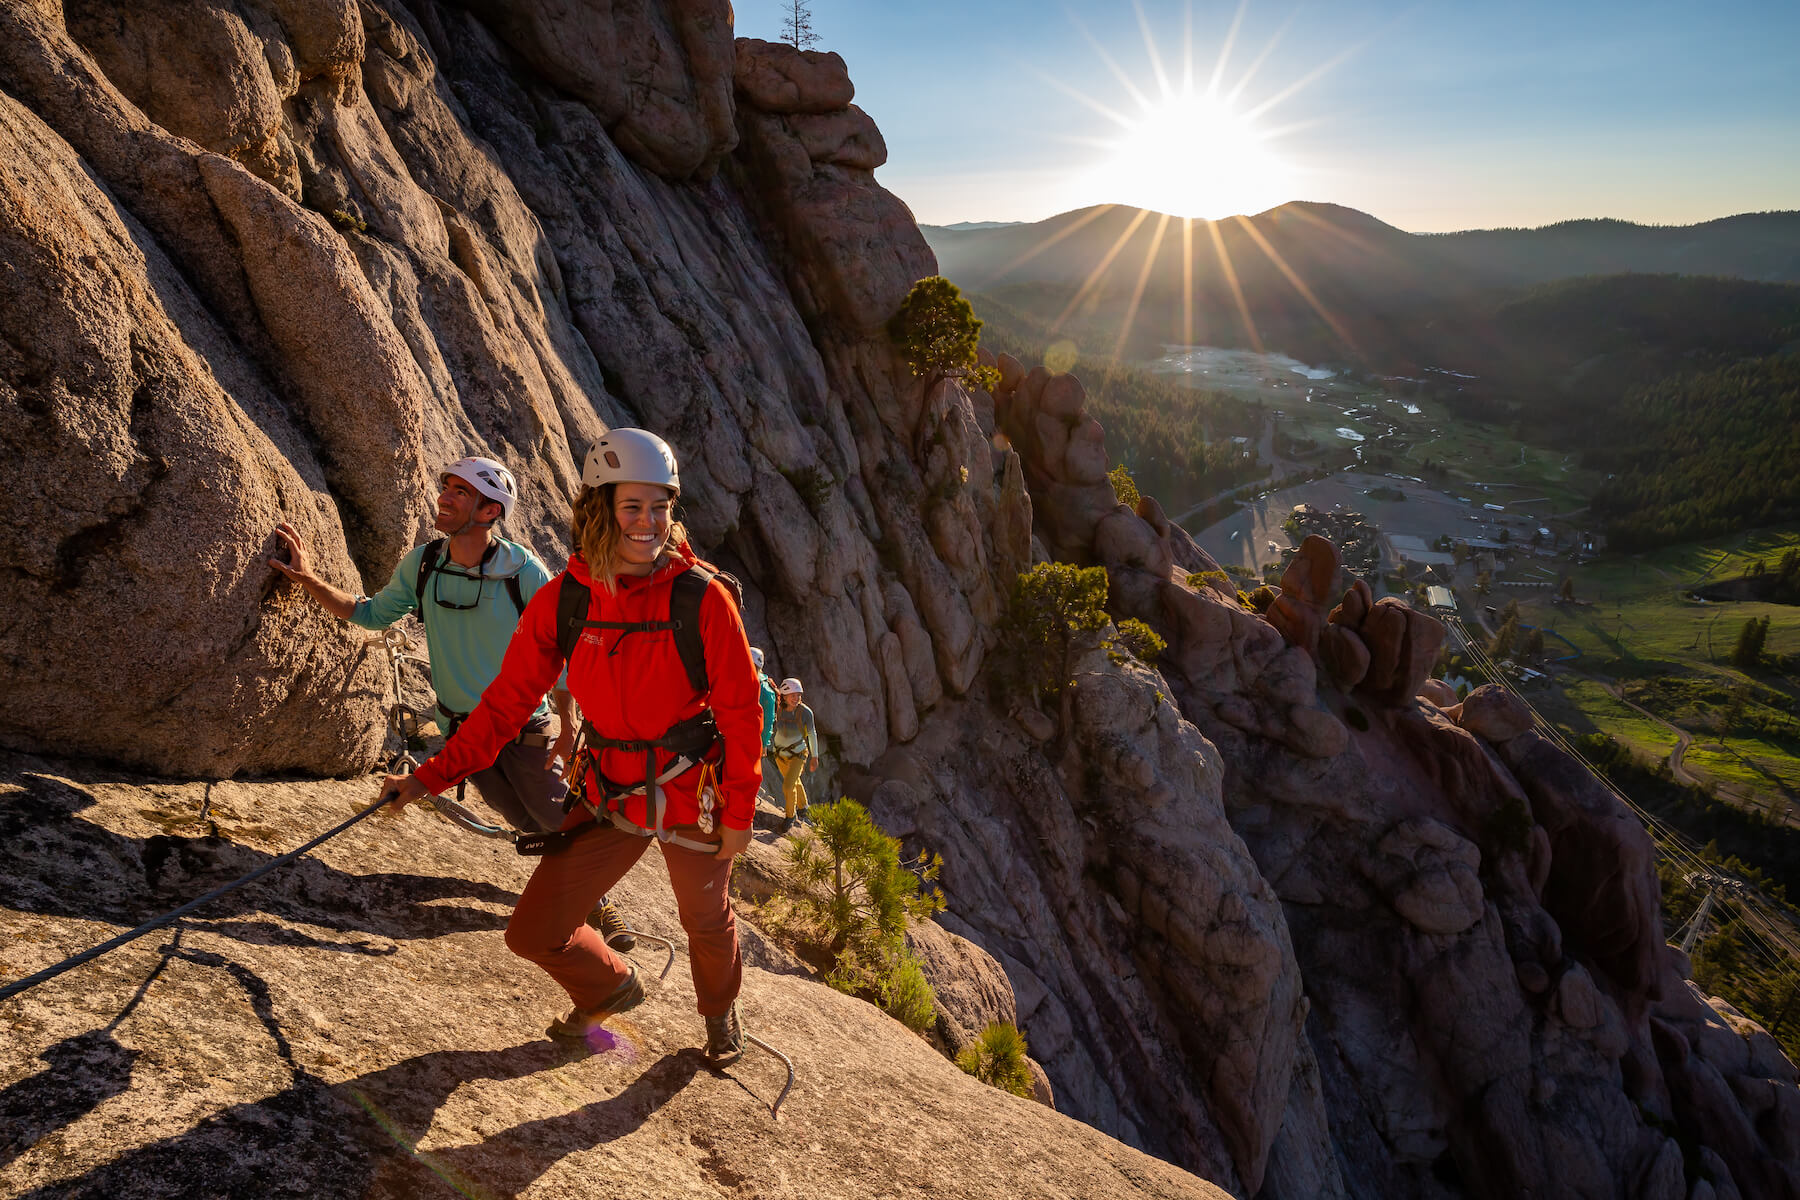 A group of climbers on the Tahoe Via Ferrata at Palisades Tahoe during sunrise. One of the best Lake Tahoe adventures!